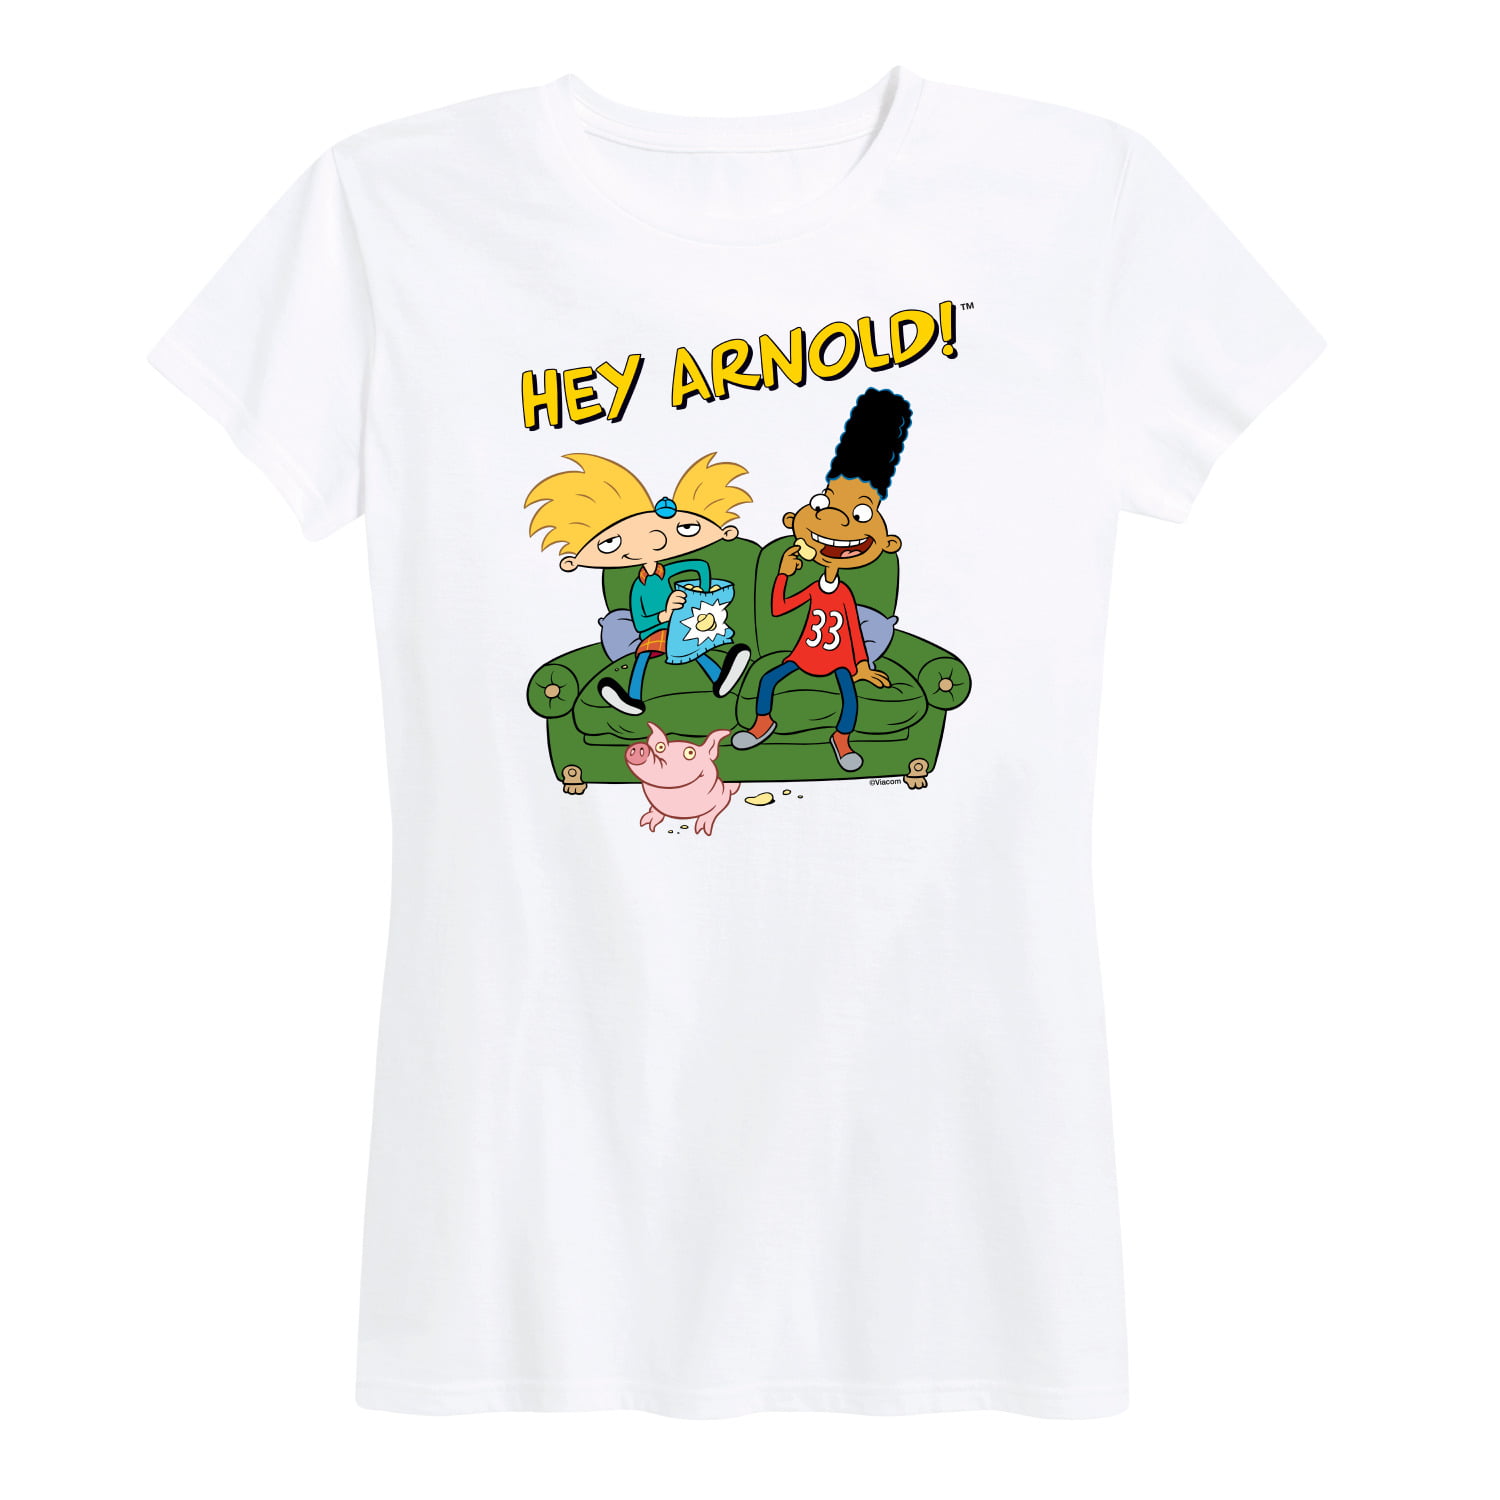 Hey Arnold! - Arnold, Gerald, and Abner - Women's Short Sleeve Graphic T- Shirt 